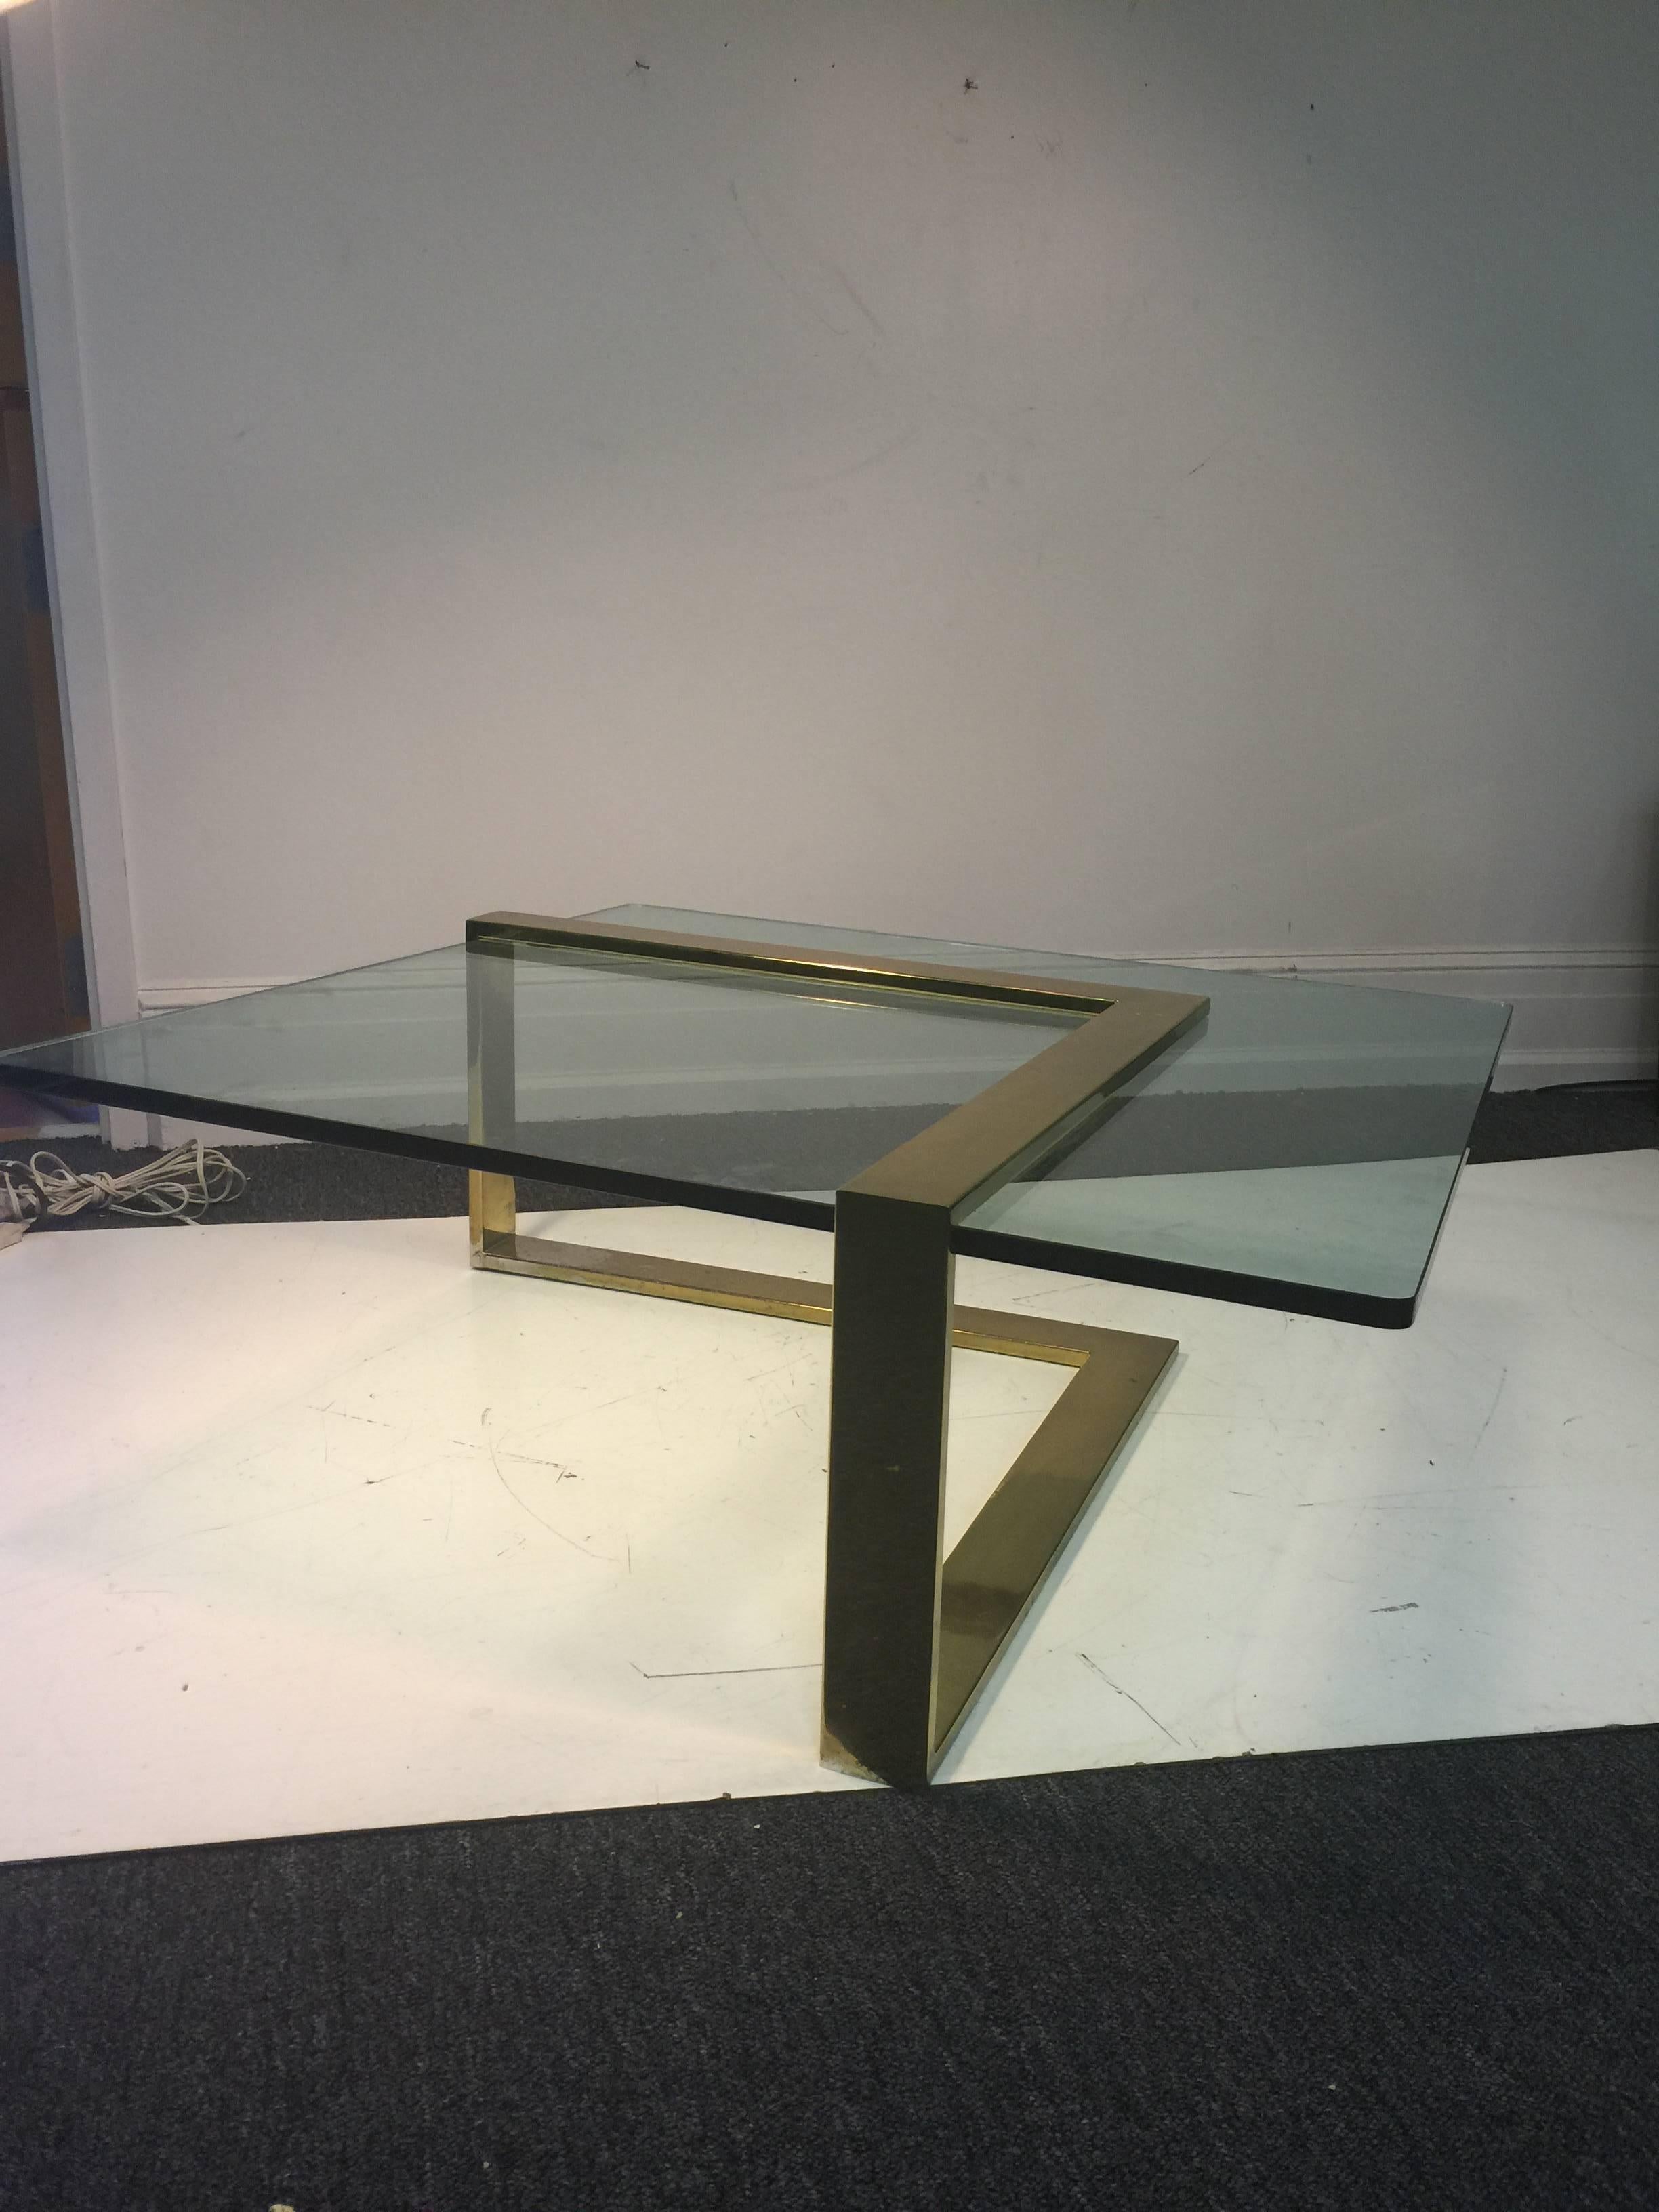 Sensational L-Shape Coffee / Cocktail Table in Brass by Pace Collection In Excellent Condition For Sale In Mount Penn, PA